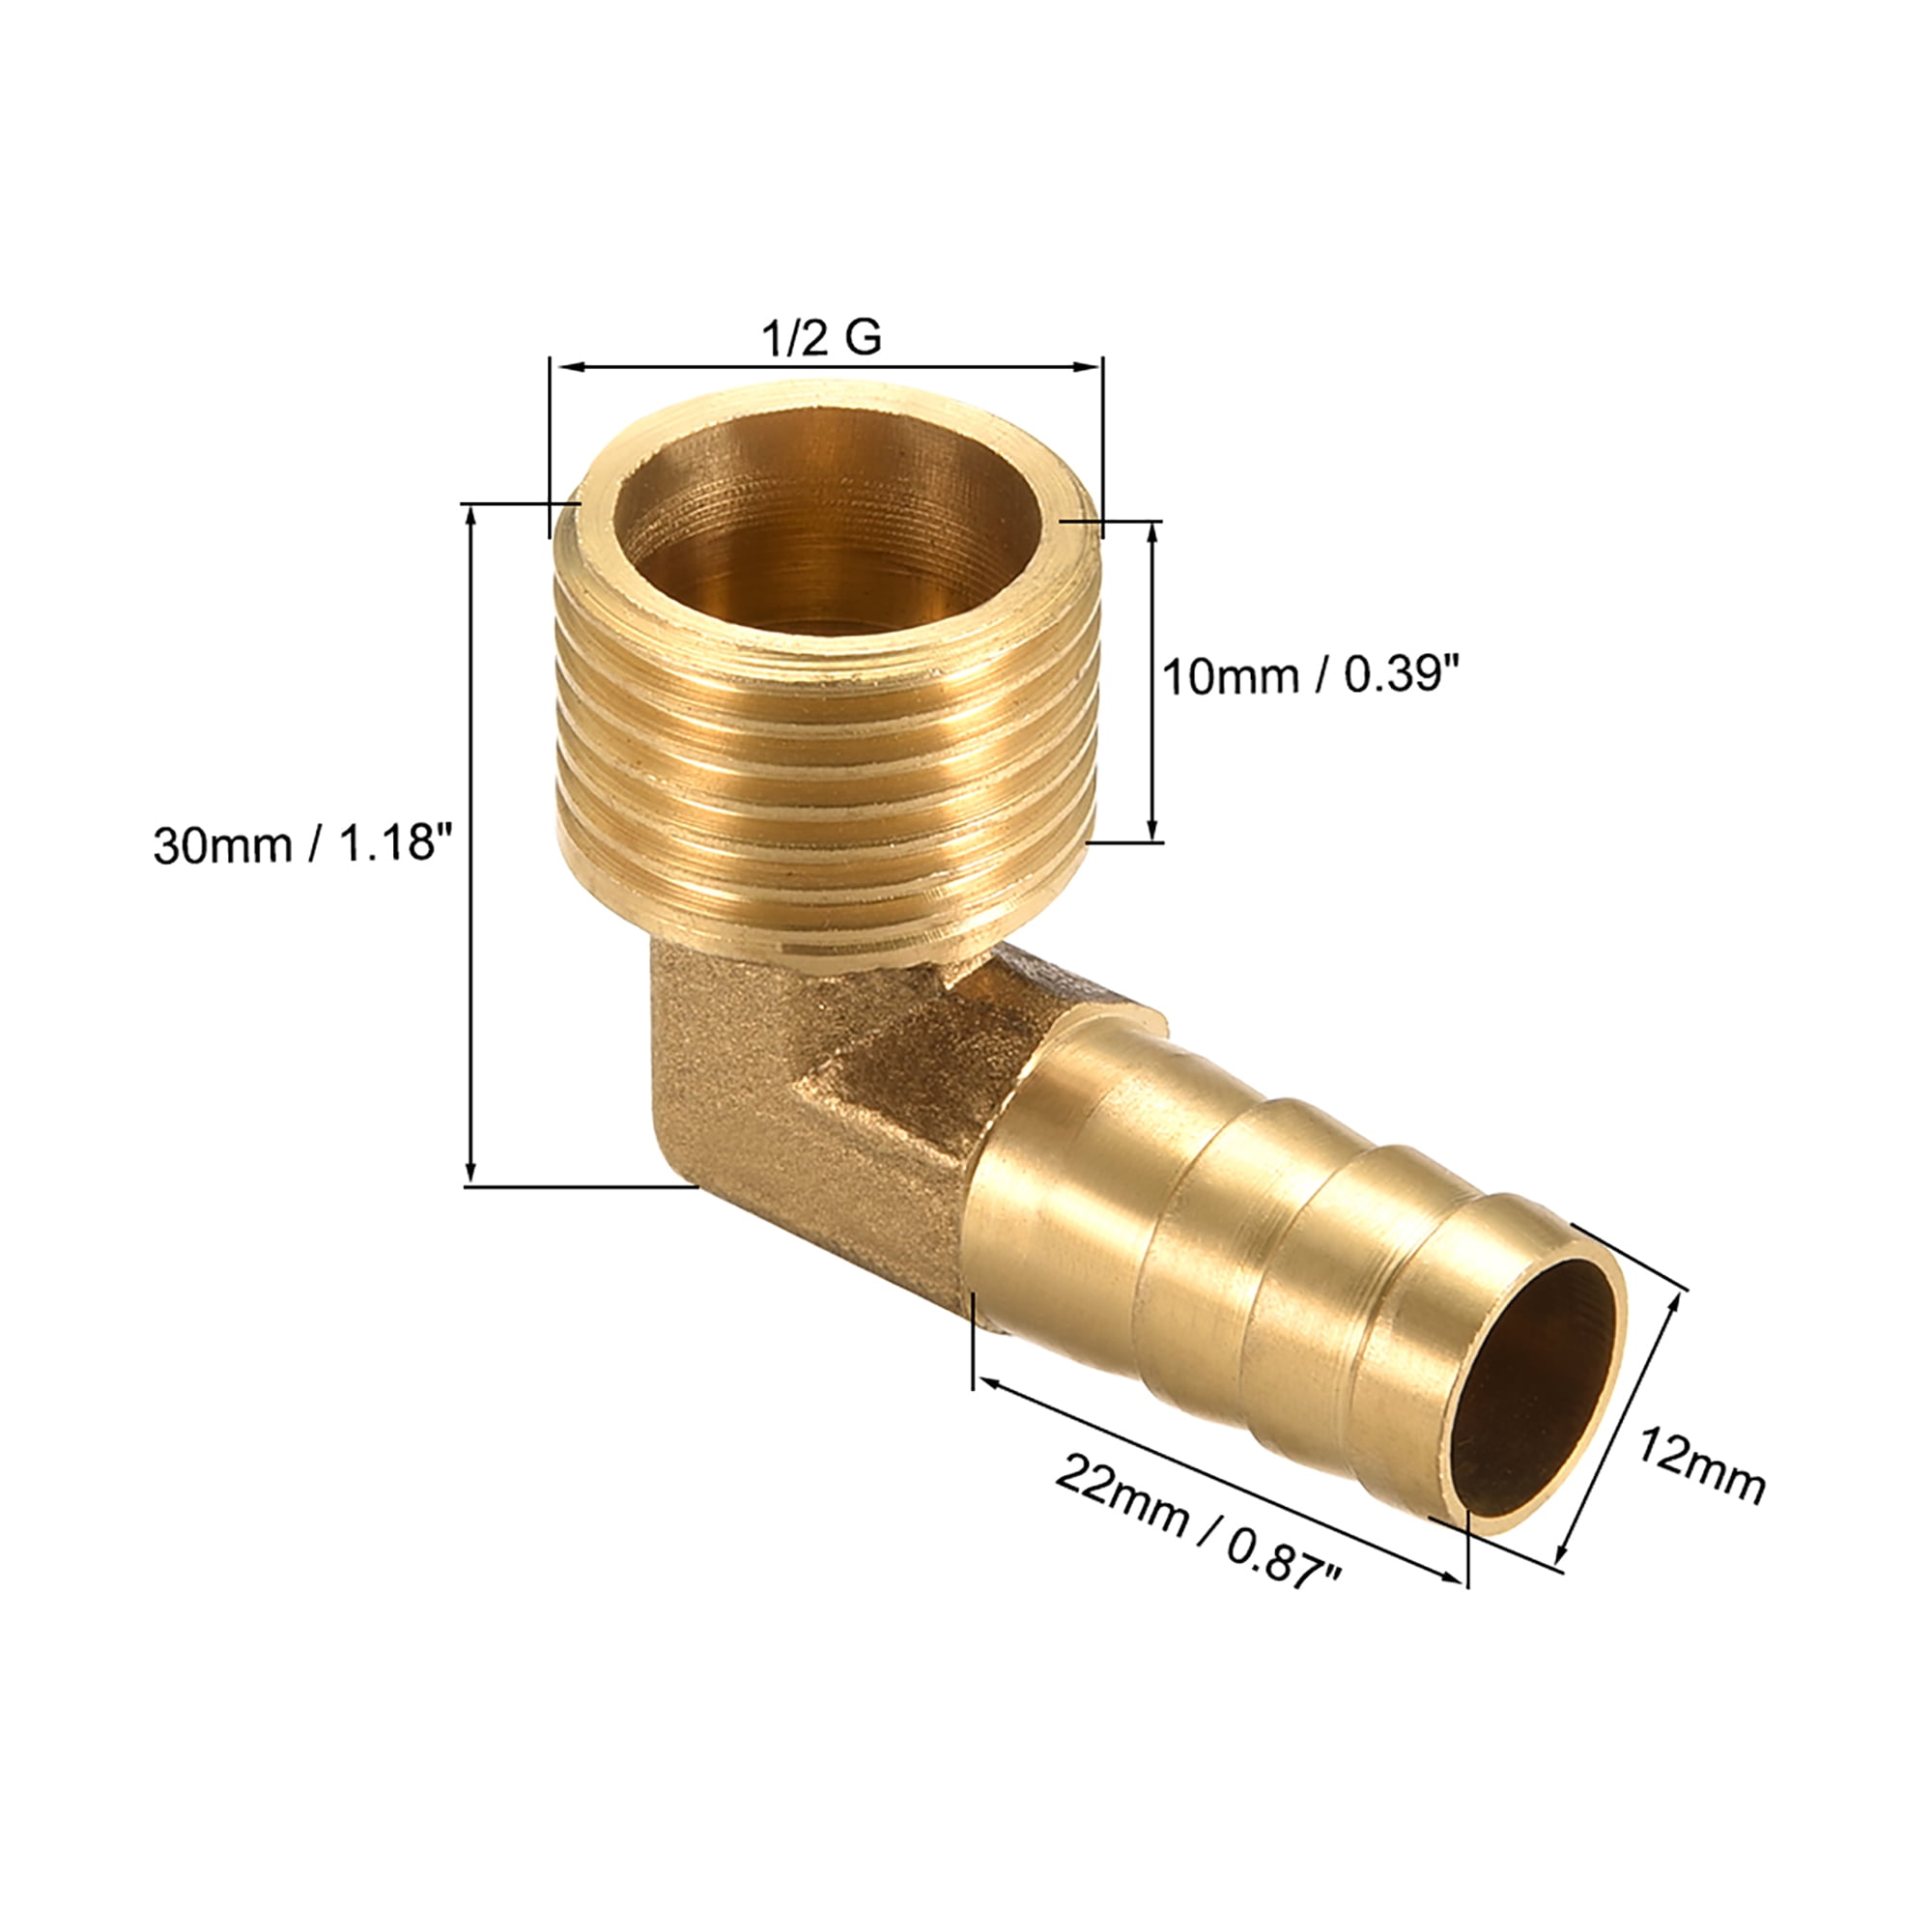 10 x Copper End Feed Street Elbow 90° 22 mm M x F Fitting Plumbing Joining Pipe 